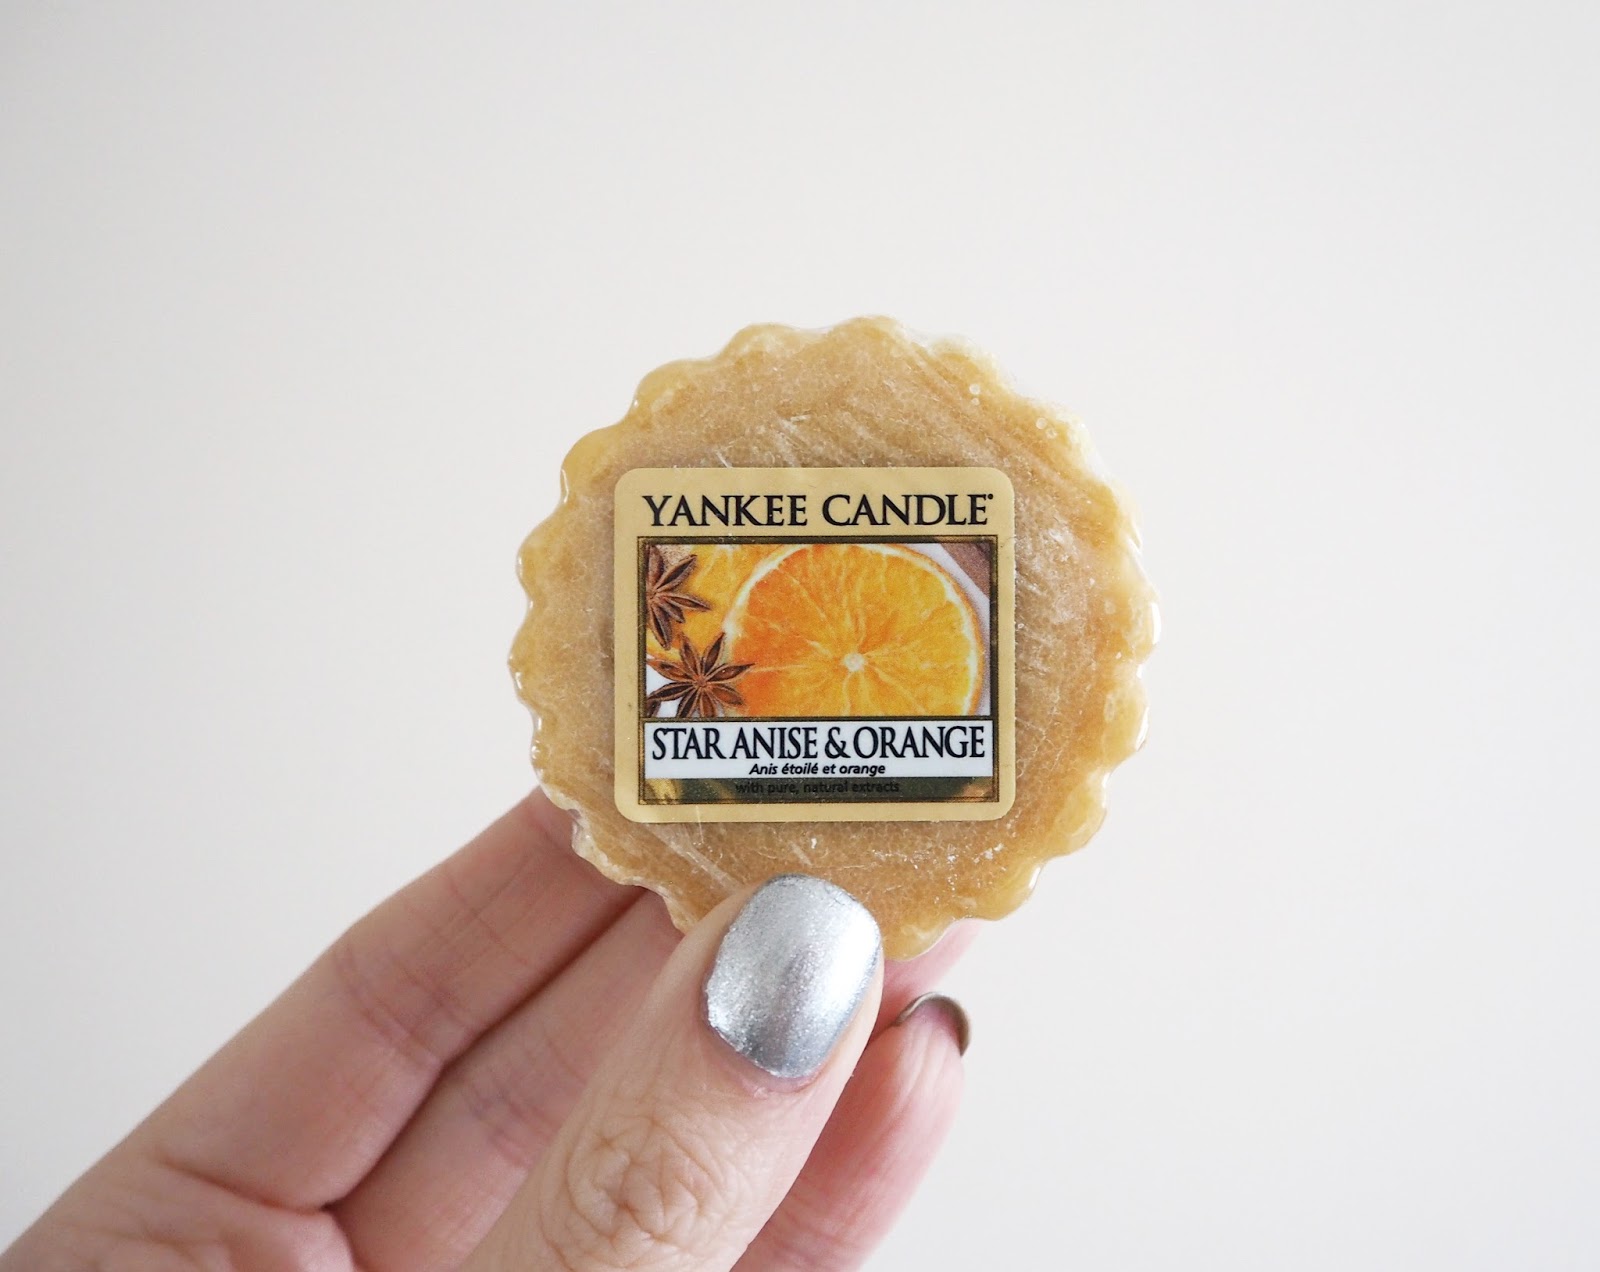 Yankee Candle Holiday Party Collection Review, Fragrance Review, Candle Review, Yankee Candles, UK Blogger, Lifestyle Blogger, Katie Kirk Loves